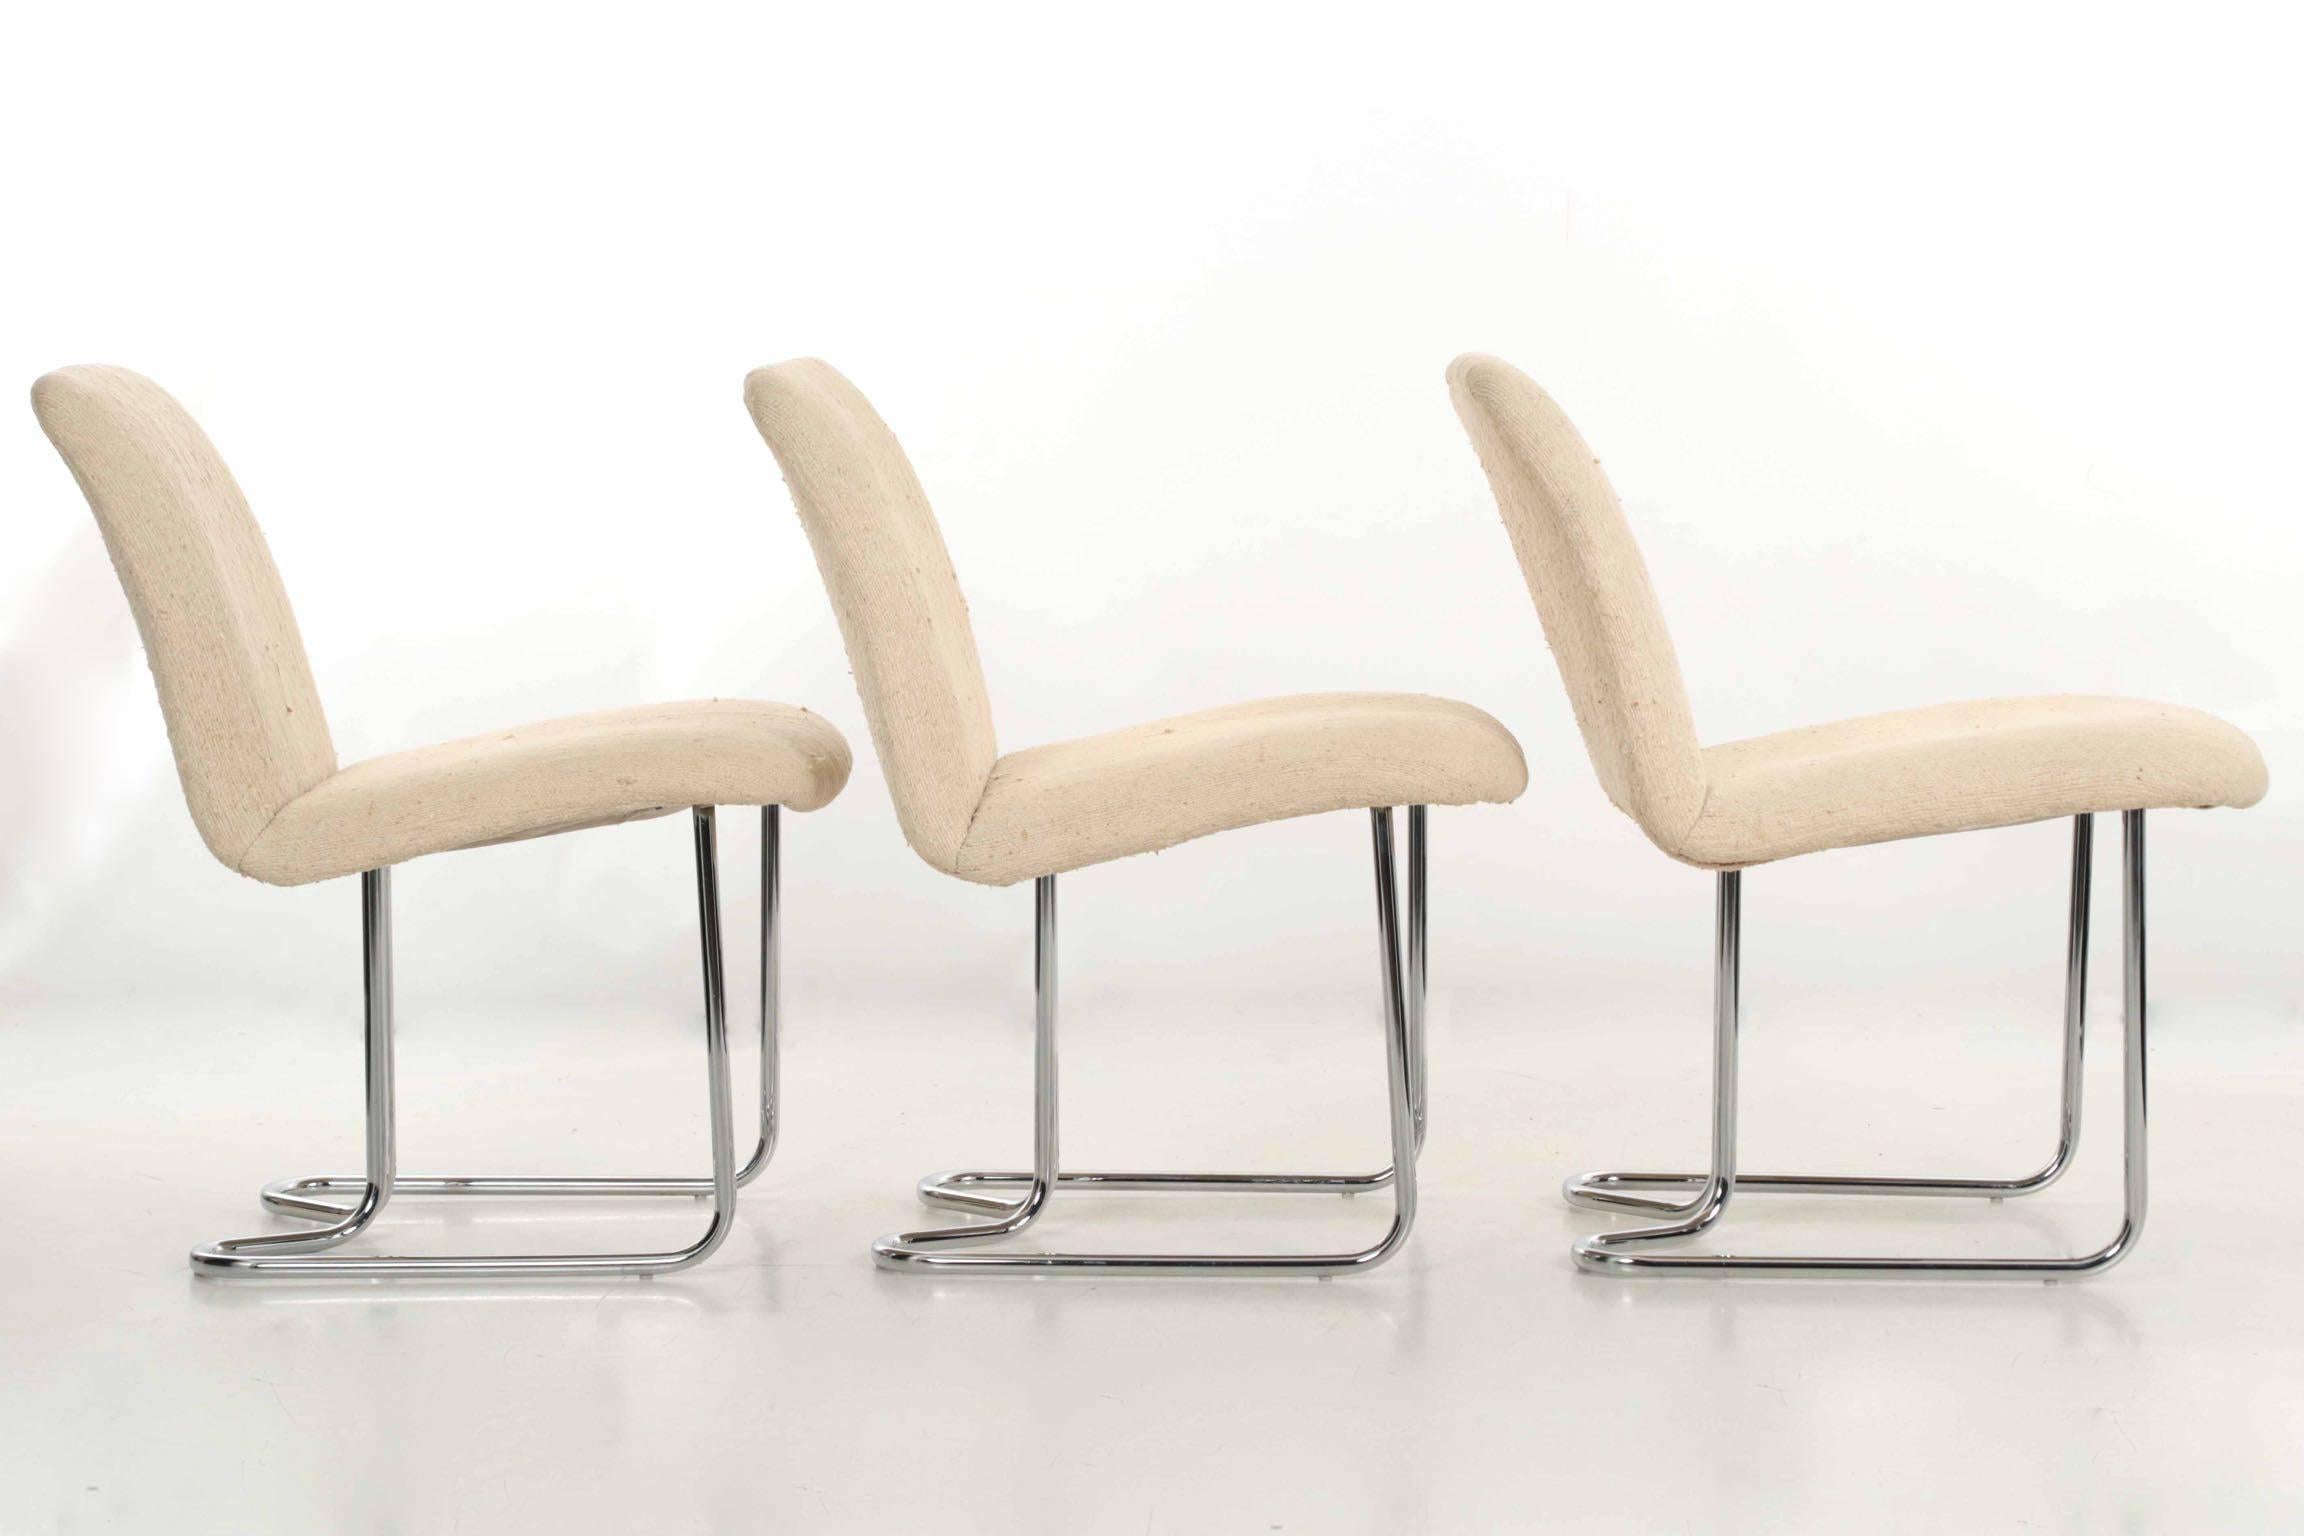 Mid-Century Modern Design Institute America Set of Four Chromed Steel Dining Chairs, circa 1970s